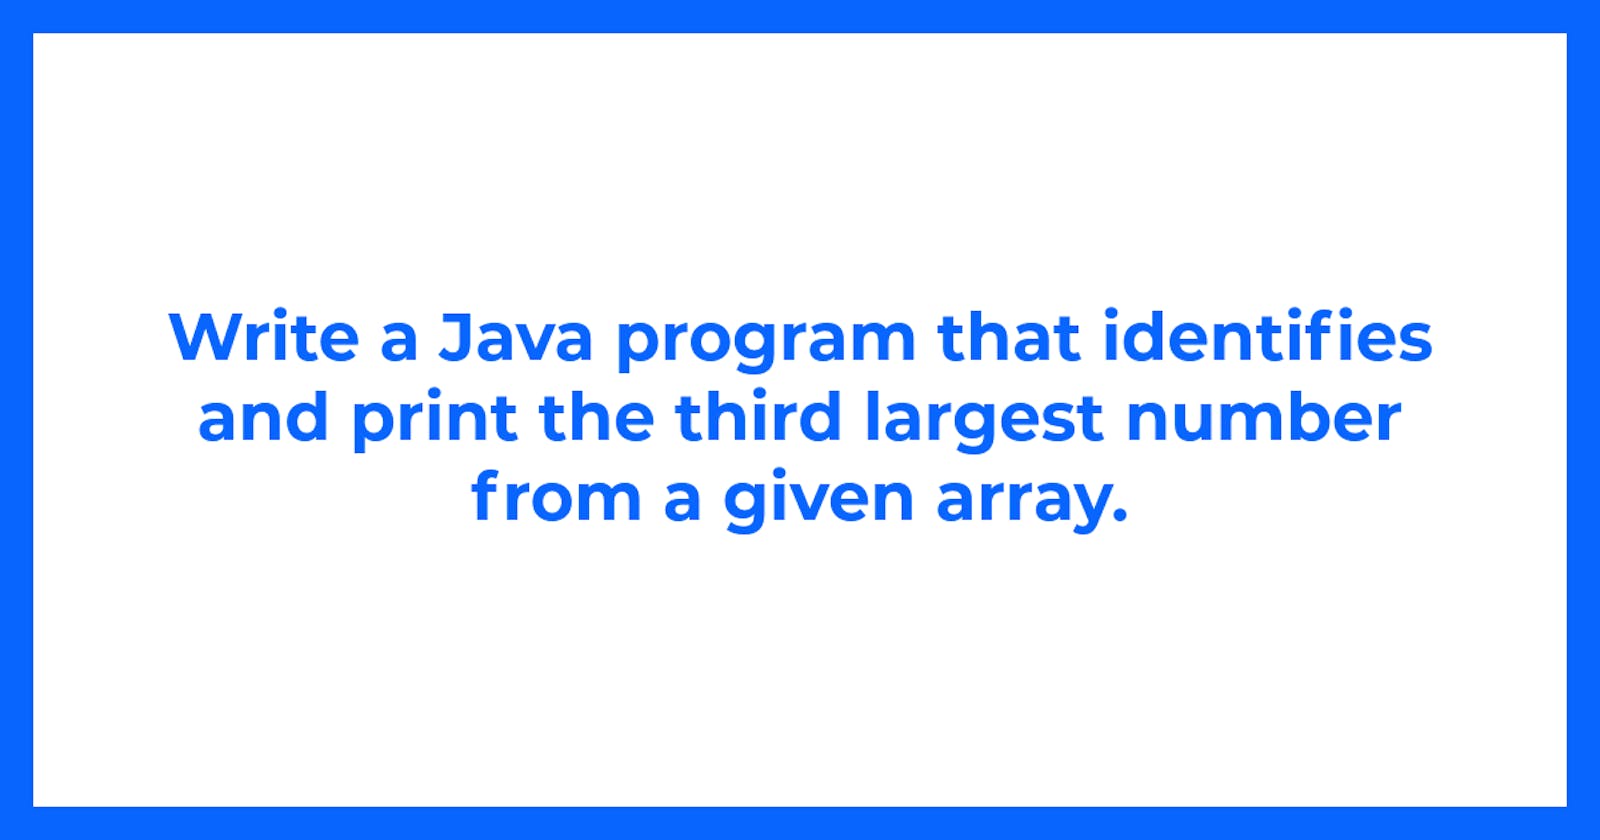 Write a Java program that identifies and print the third largest number from a given array.